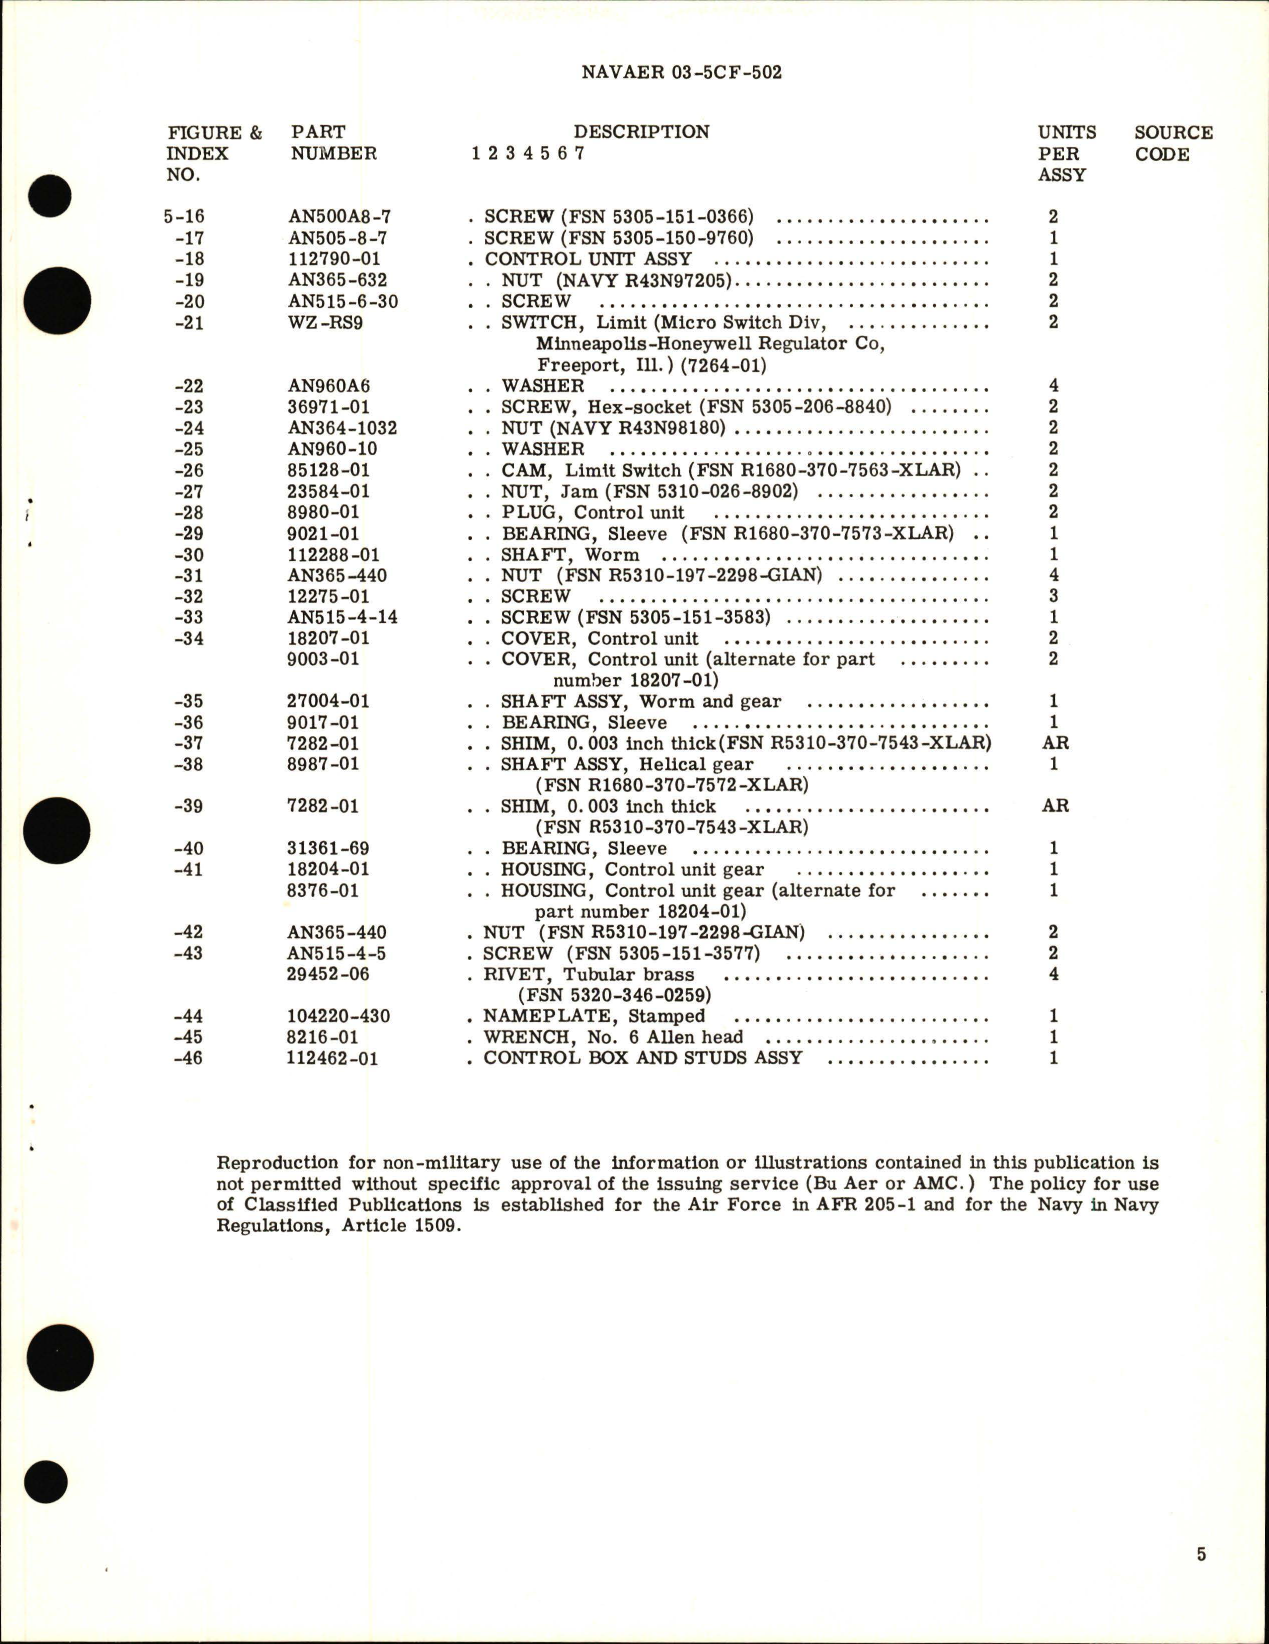 Sample page 5 from AirCorps Library document: Overhaul Instructions with Parts Breakdown for Control Box - Part 112872-01 